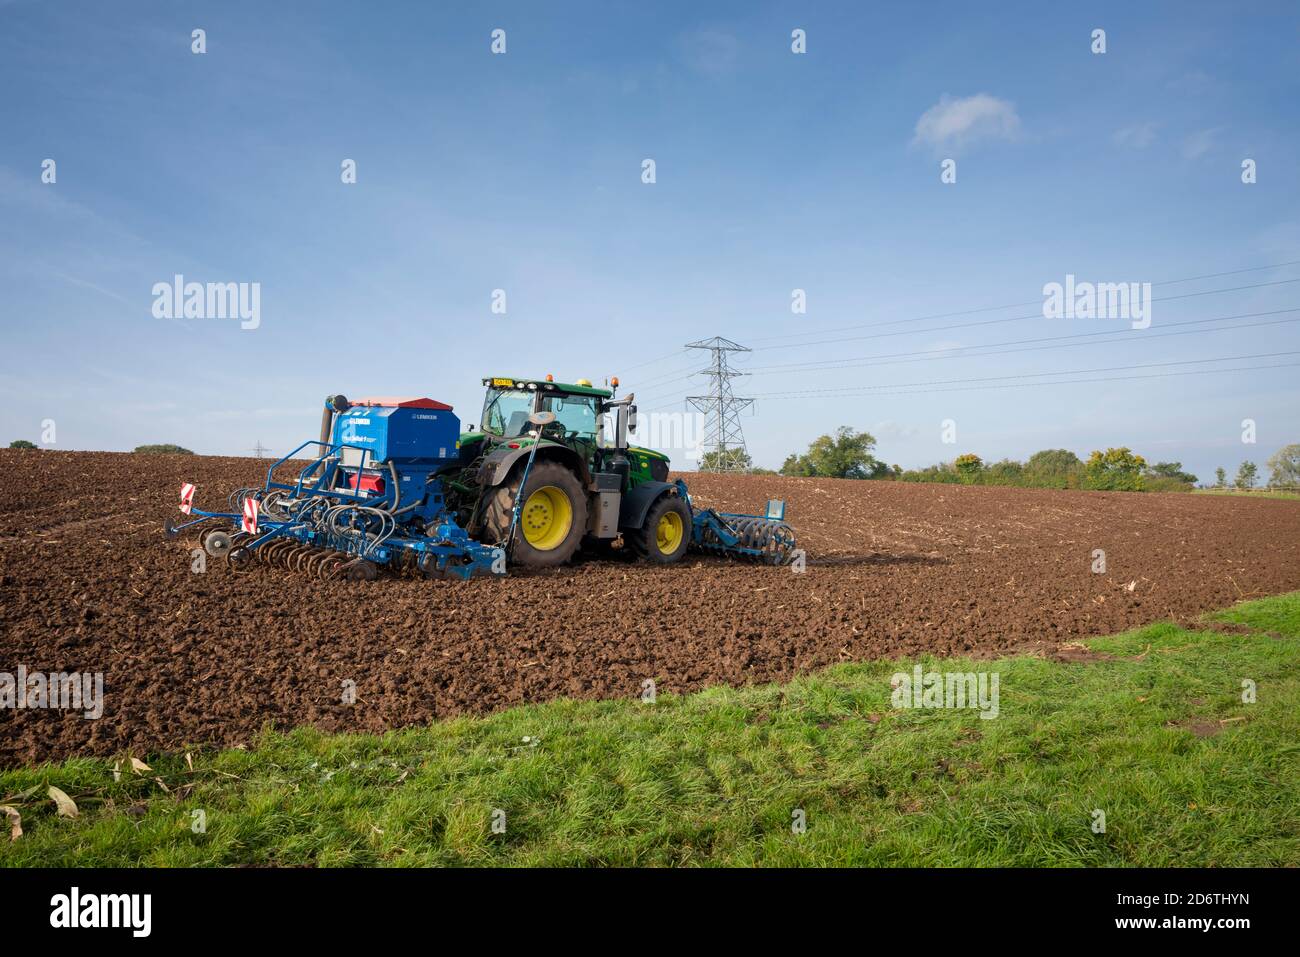 A John Deere 6175R tractor sowing seeds in a freshly ploughed field using a Lemken Solitair 9 pneumatic seed drill. Wrington, North Somerset, England. Stock Photo